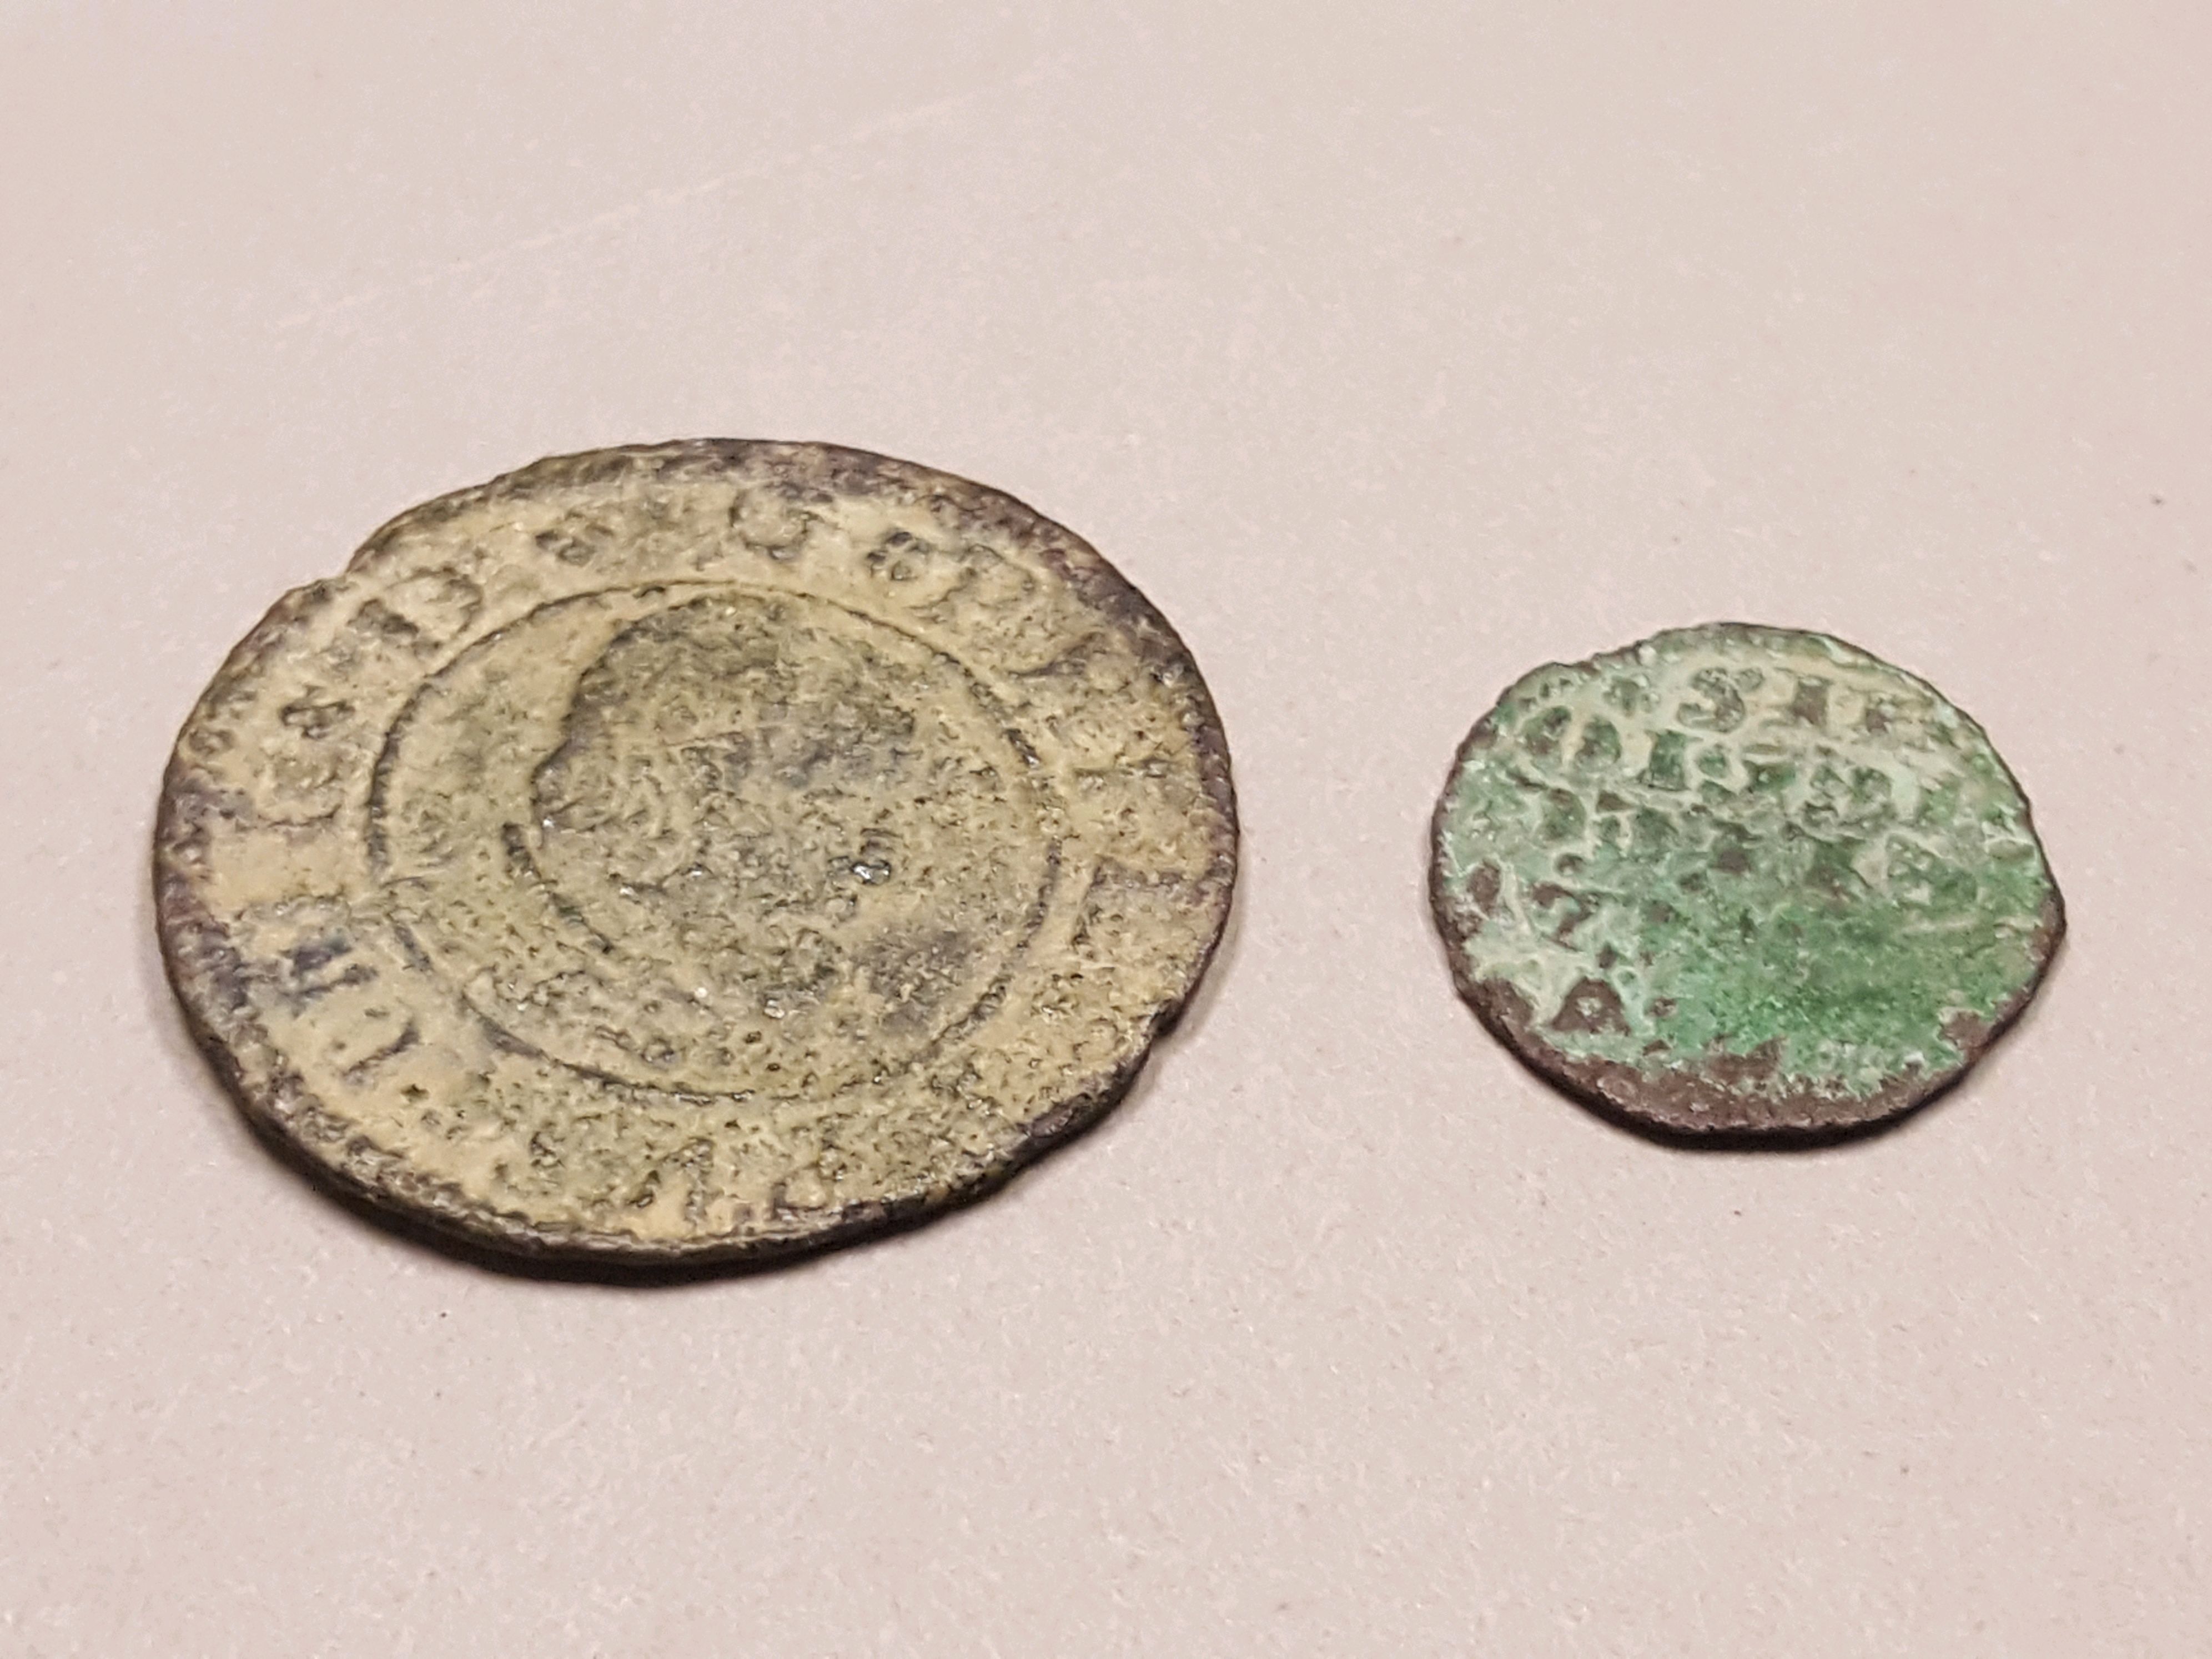 Centuries old Spanish Coins Now Believed to be From Modern Coin Collection - Glen Canyon National Recreation Area (U.S. National Park Service)